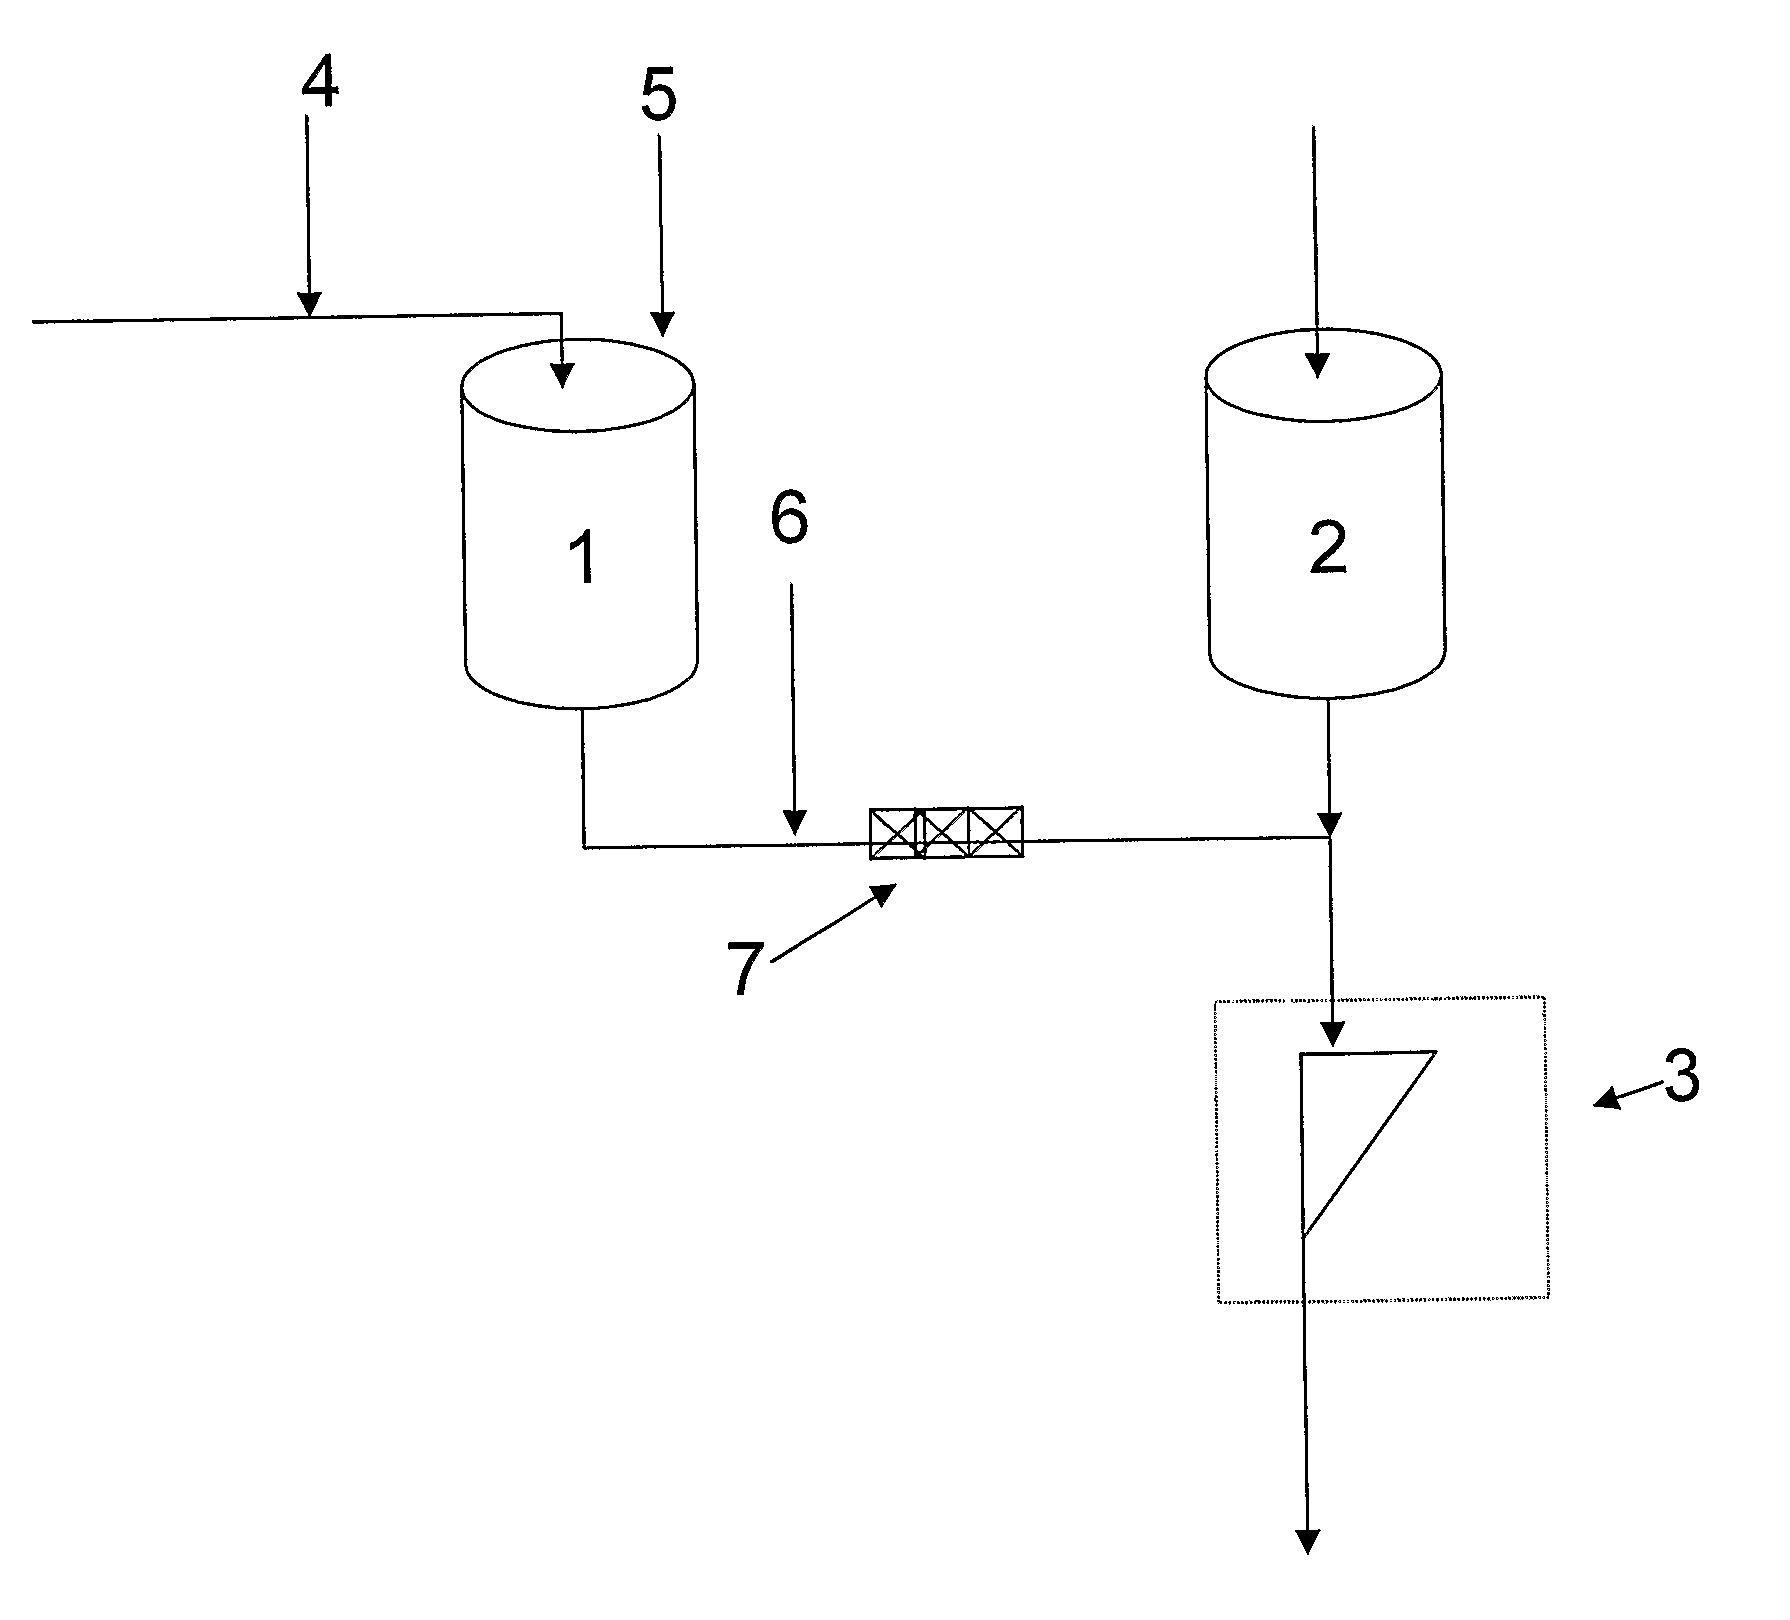 Process for Producing a Paper or Board and a Paper or Board Produced According to the Process